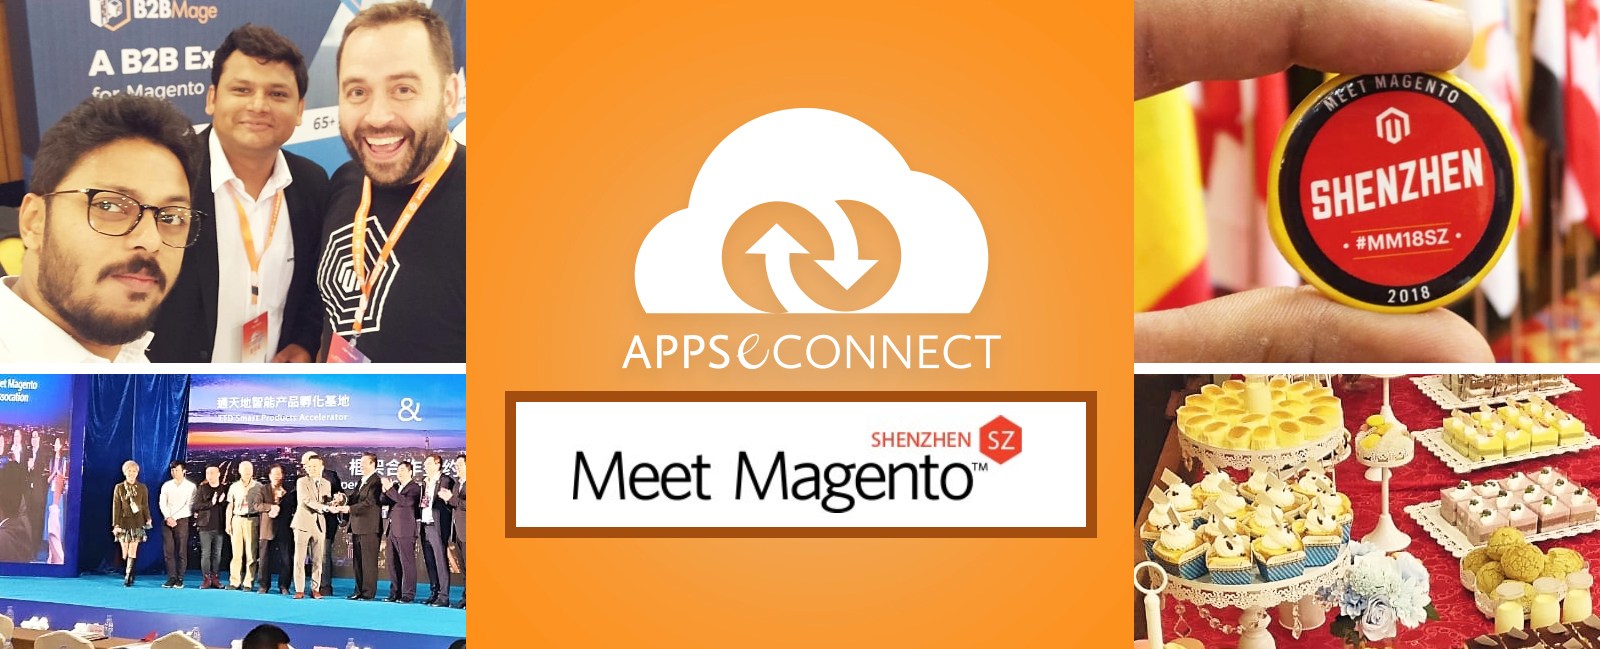 APPSeCONNECT-at-Meet-Magento-China-Shenzhen-2018